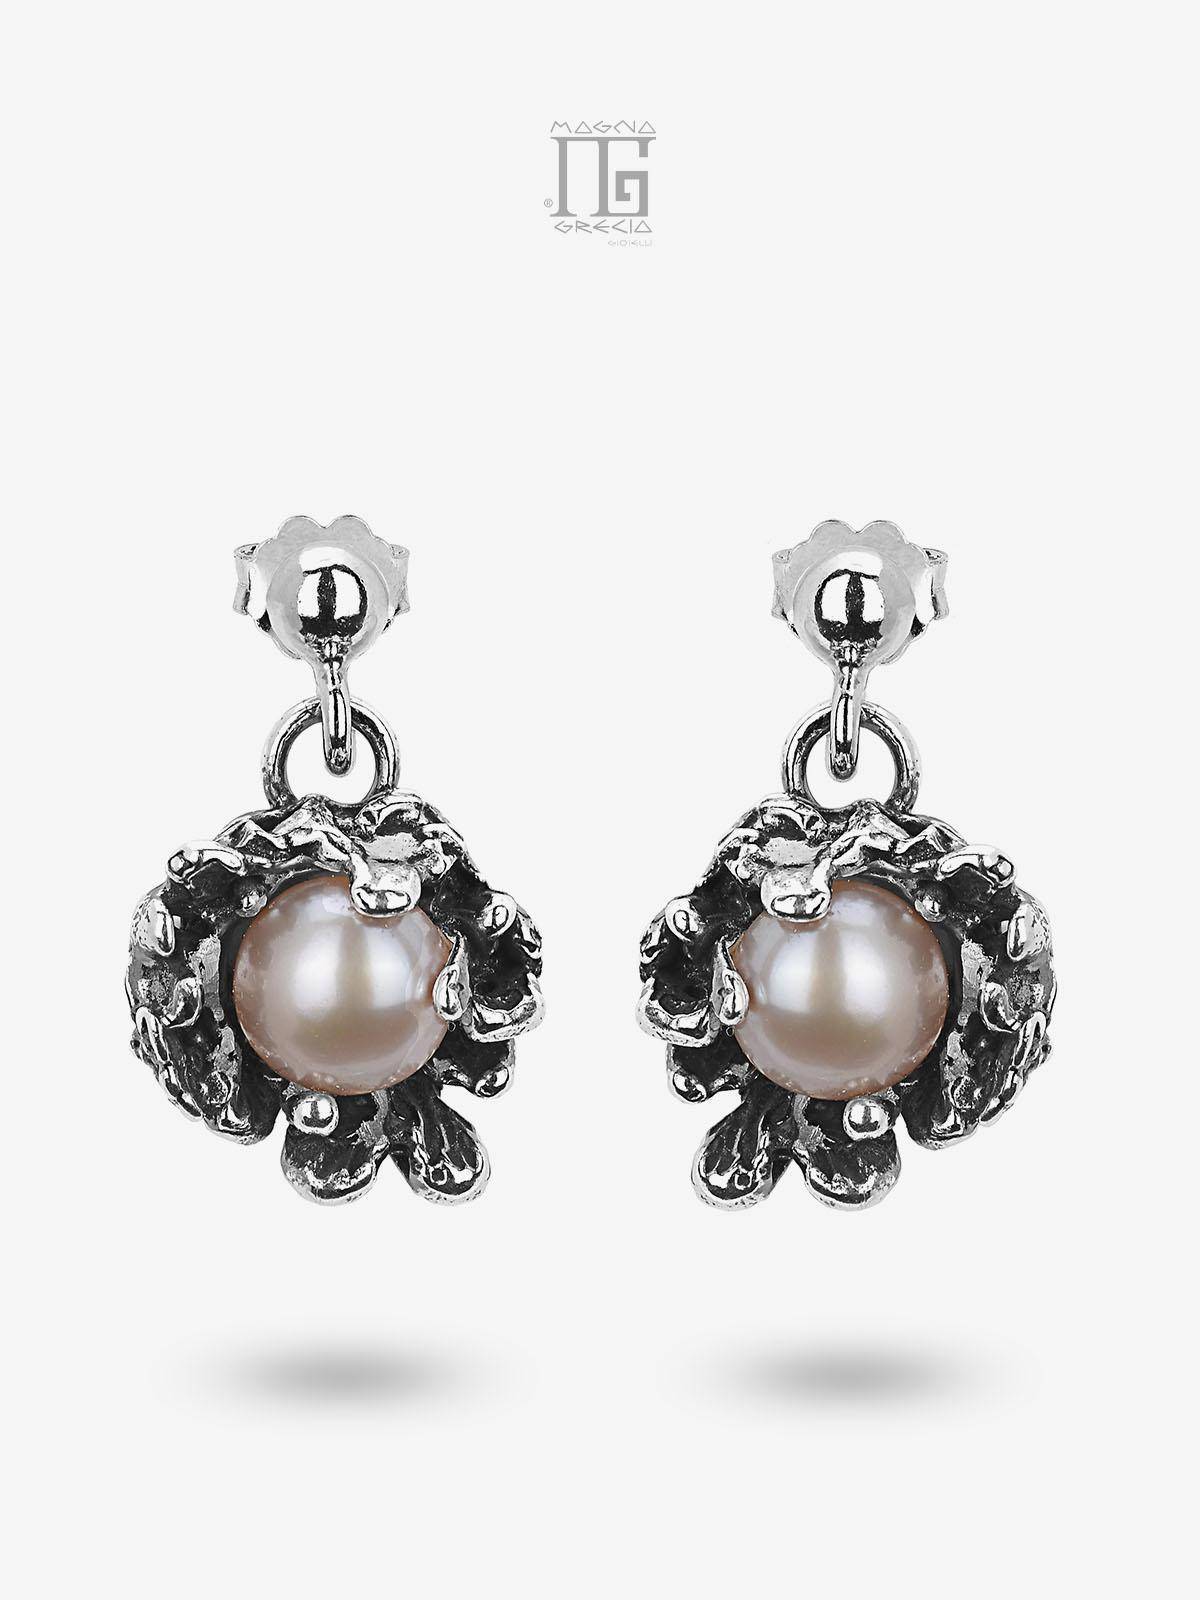 Silver earrings with Apotropaic Mask and natural freshwater pearls in Lilac color Cod. MGK 4093 V